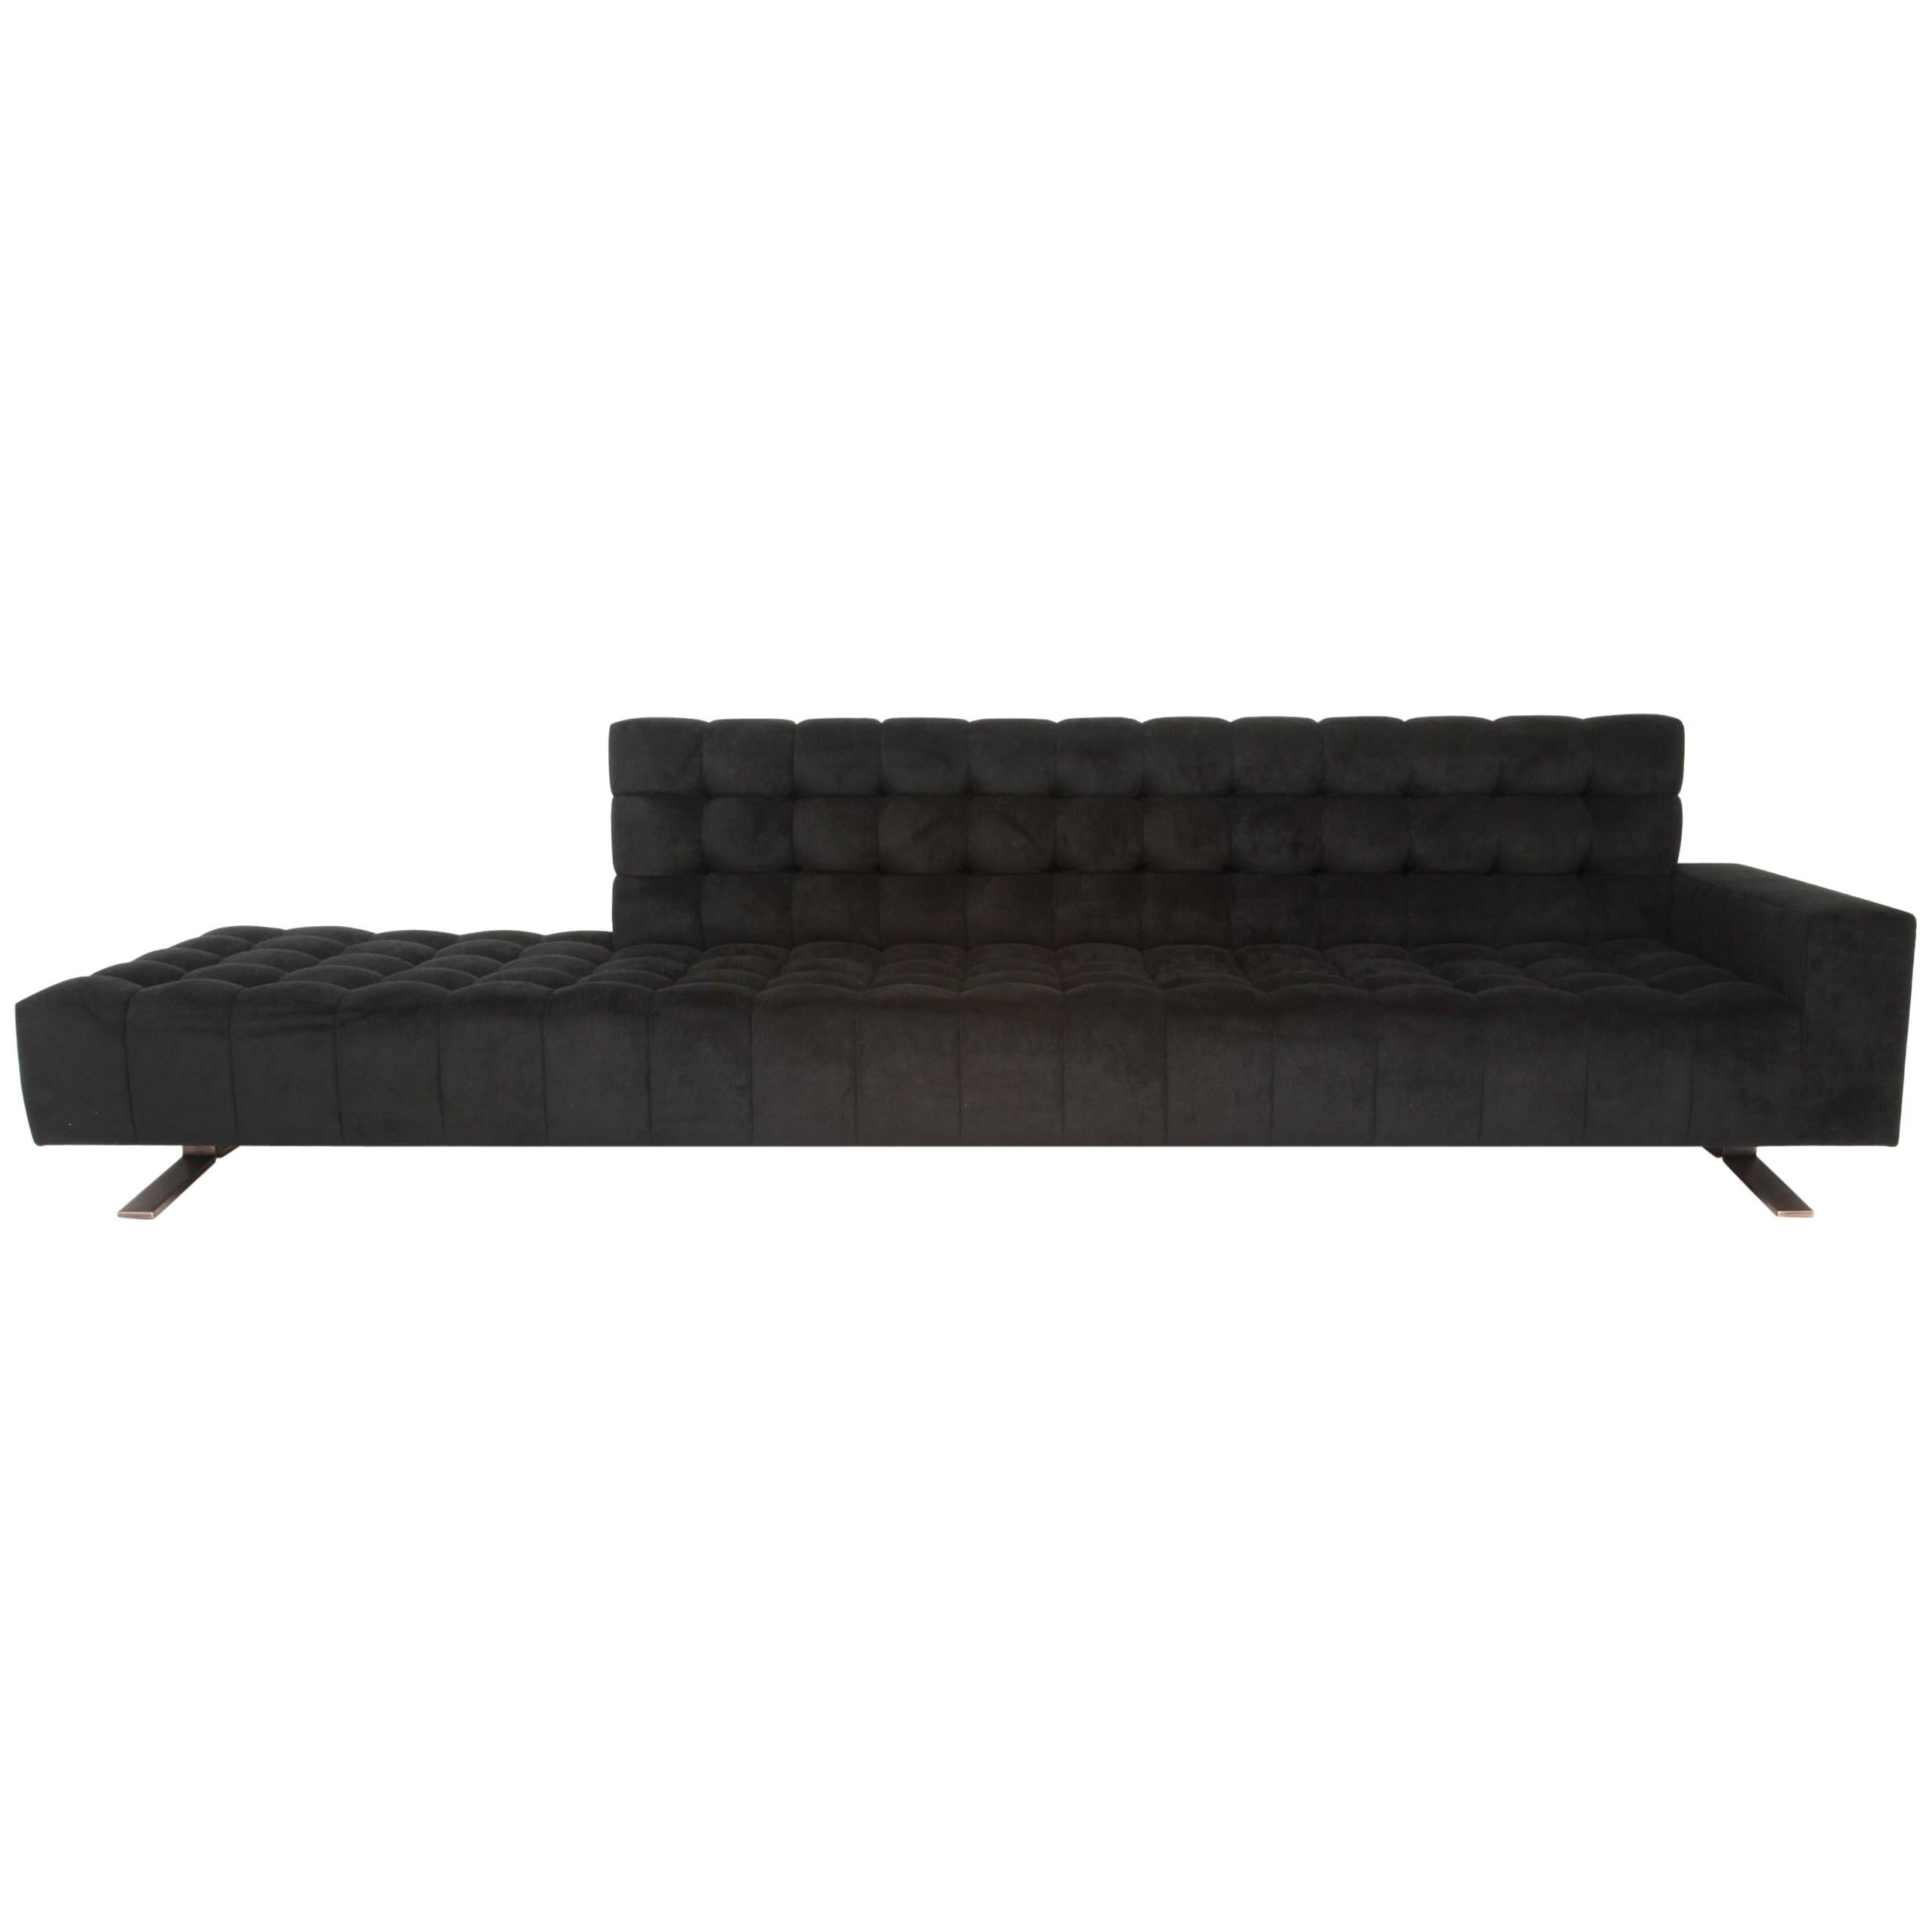 Abyss Sofa Channeling Deep Tufted Metal Legs Black Custom For Sale